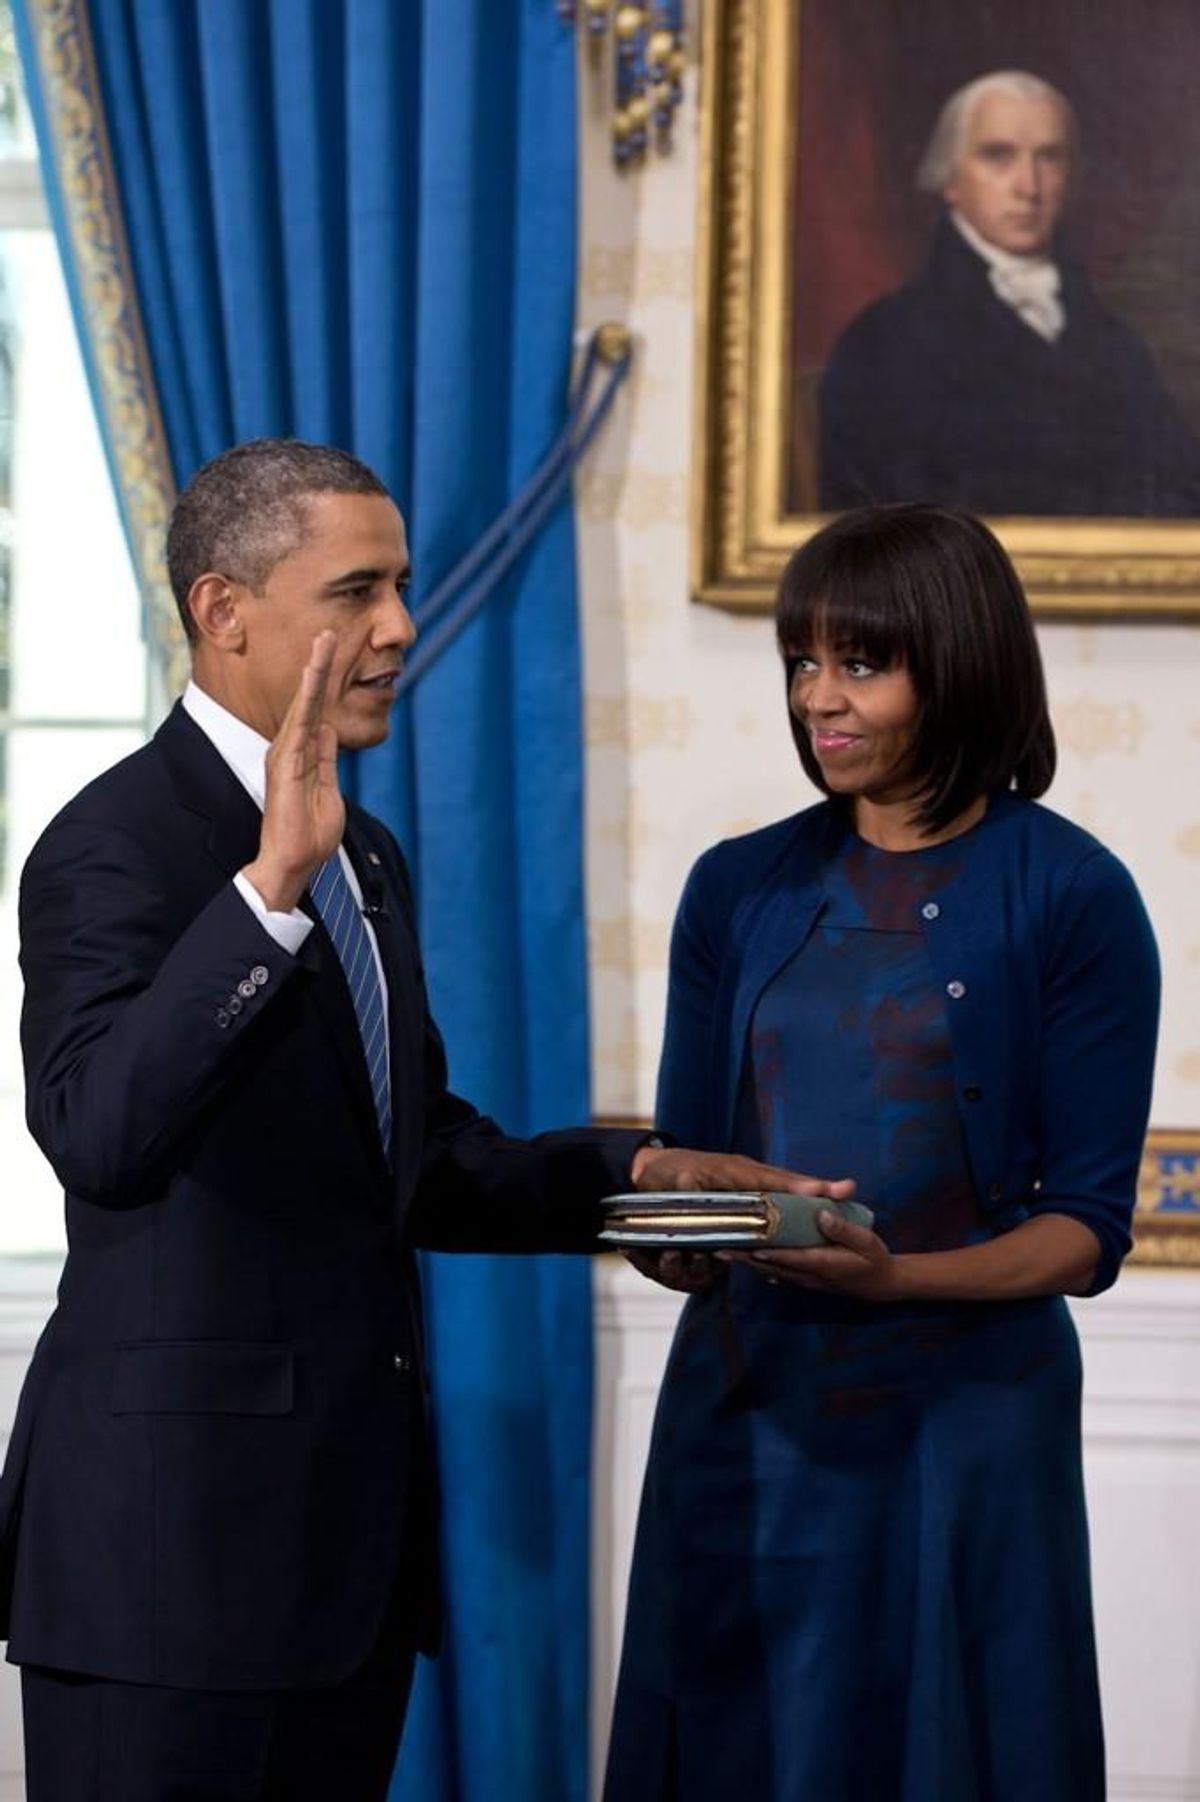 With Michelle Obama holding the bible, President Obama takes the oath of office Jan. 20, 2013   (Pete Souza/White House)